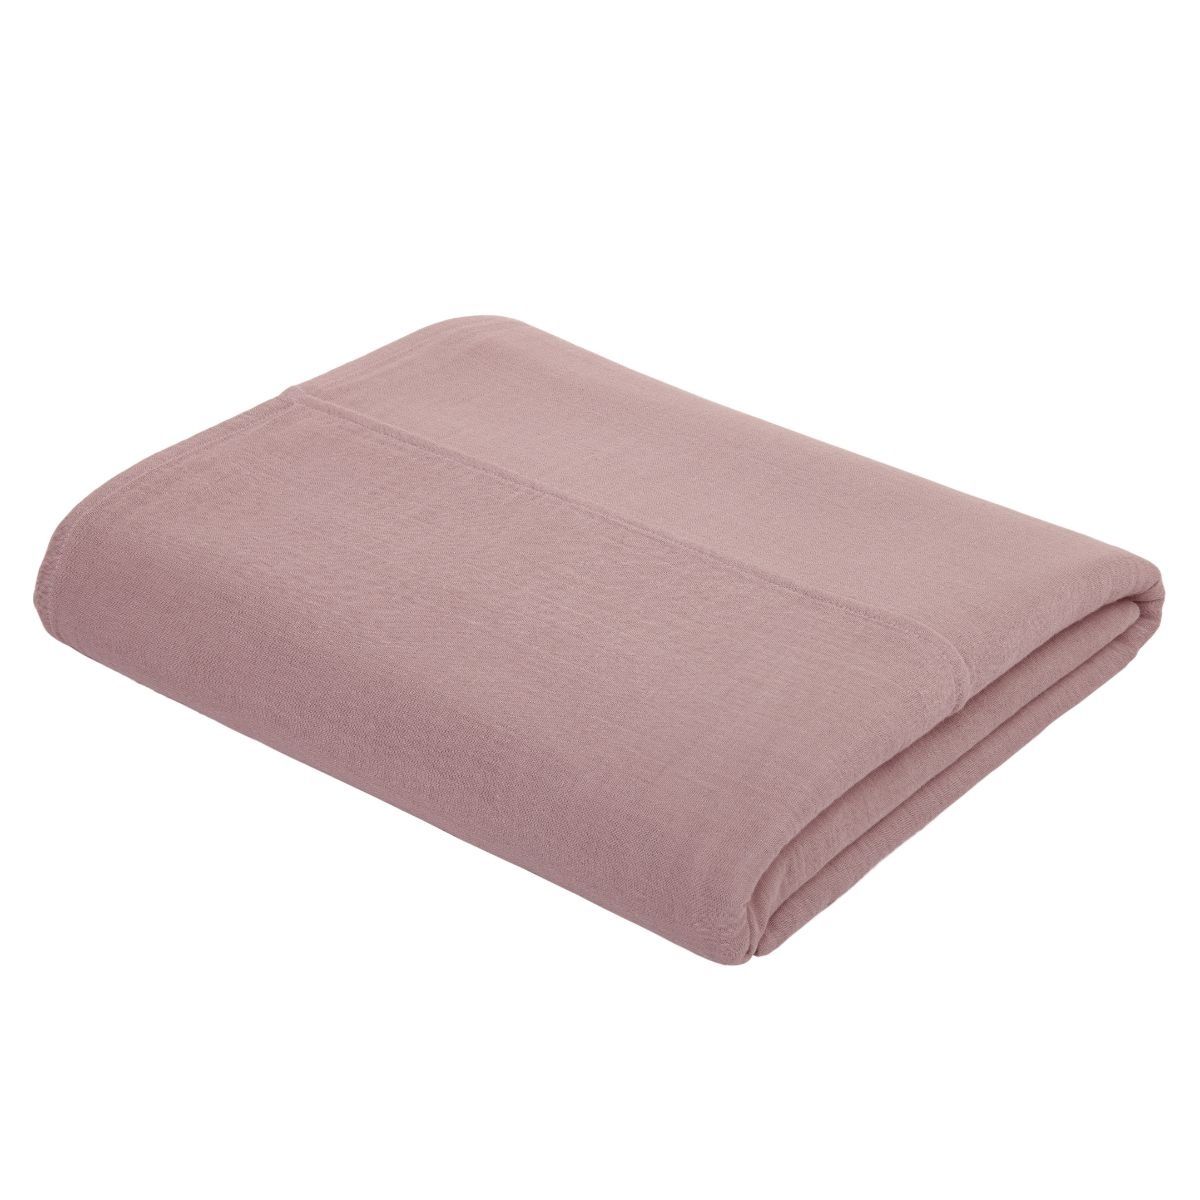 Numero 74 - Top Flat Bed Sheet dusty pink - Lino - 